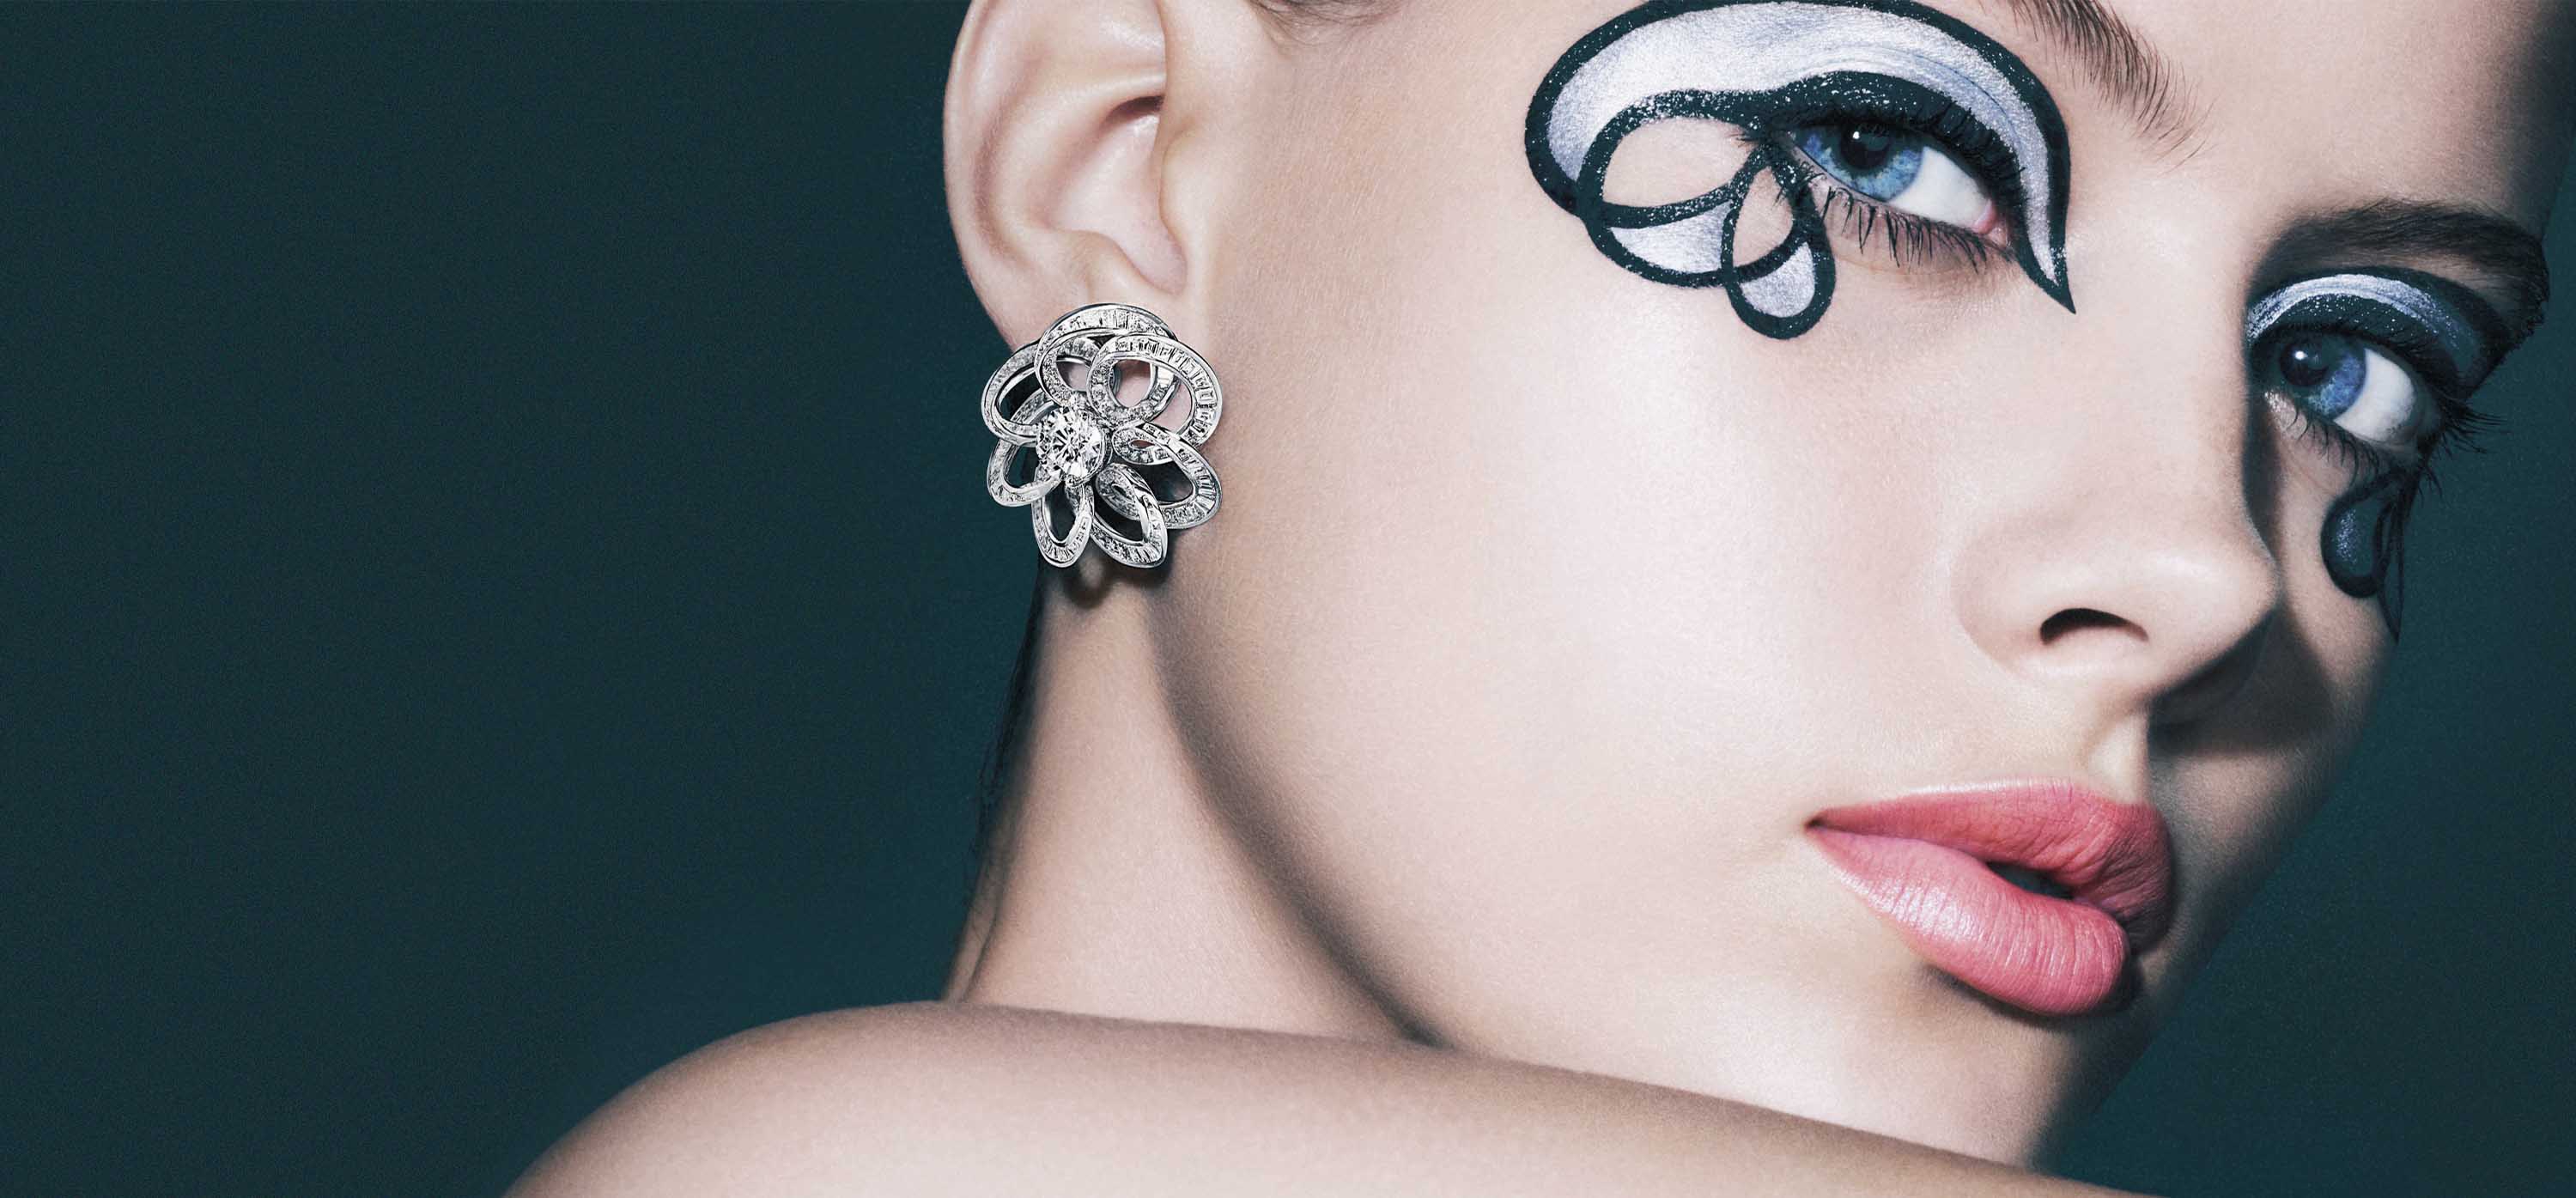 Model wearing Inspired by Twombly earrings from the Graff jewellery collection